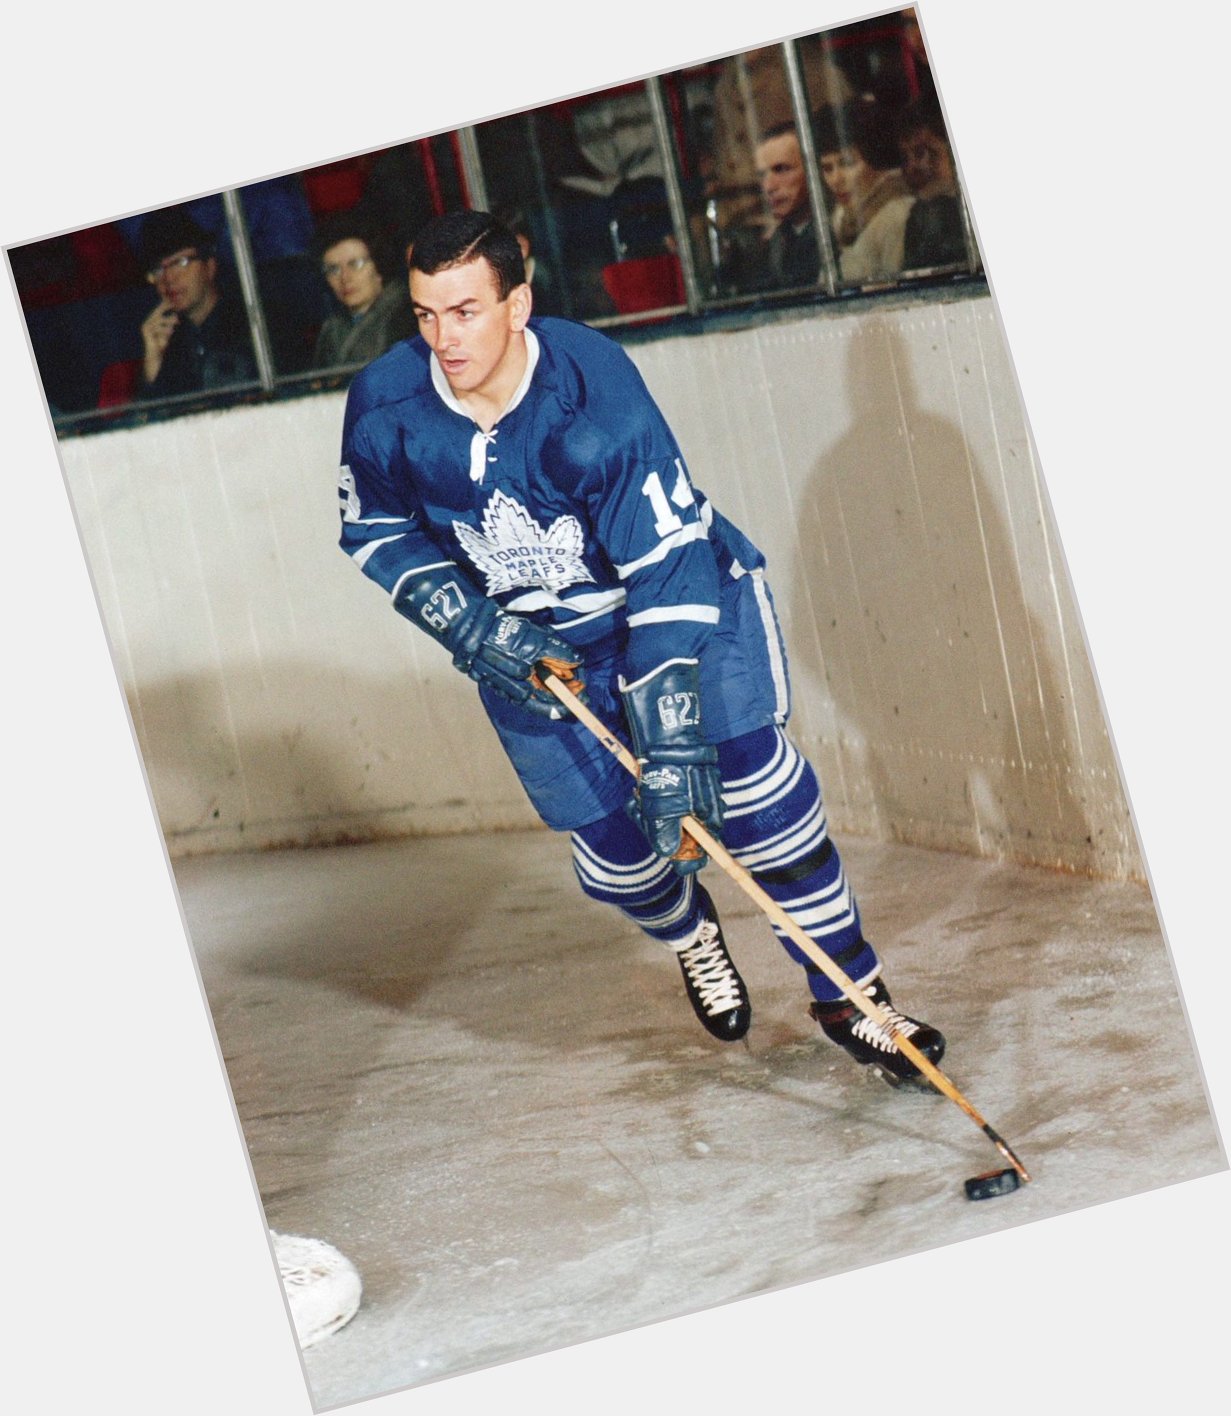 Happy 80th birthday to Maple Leafs legend Dave Keon! 